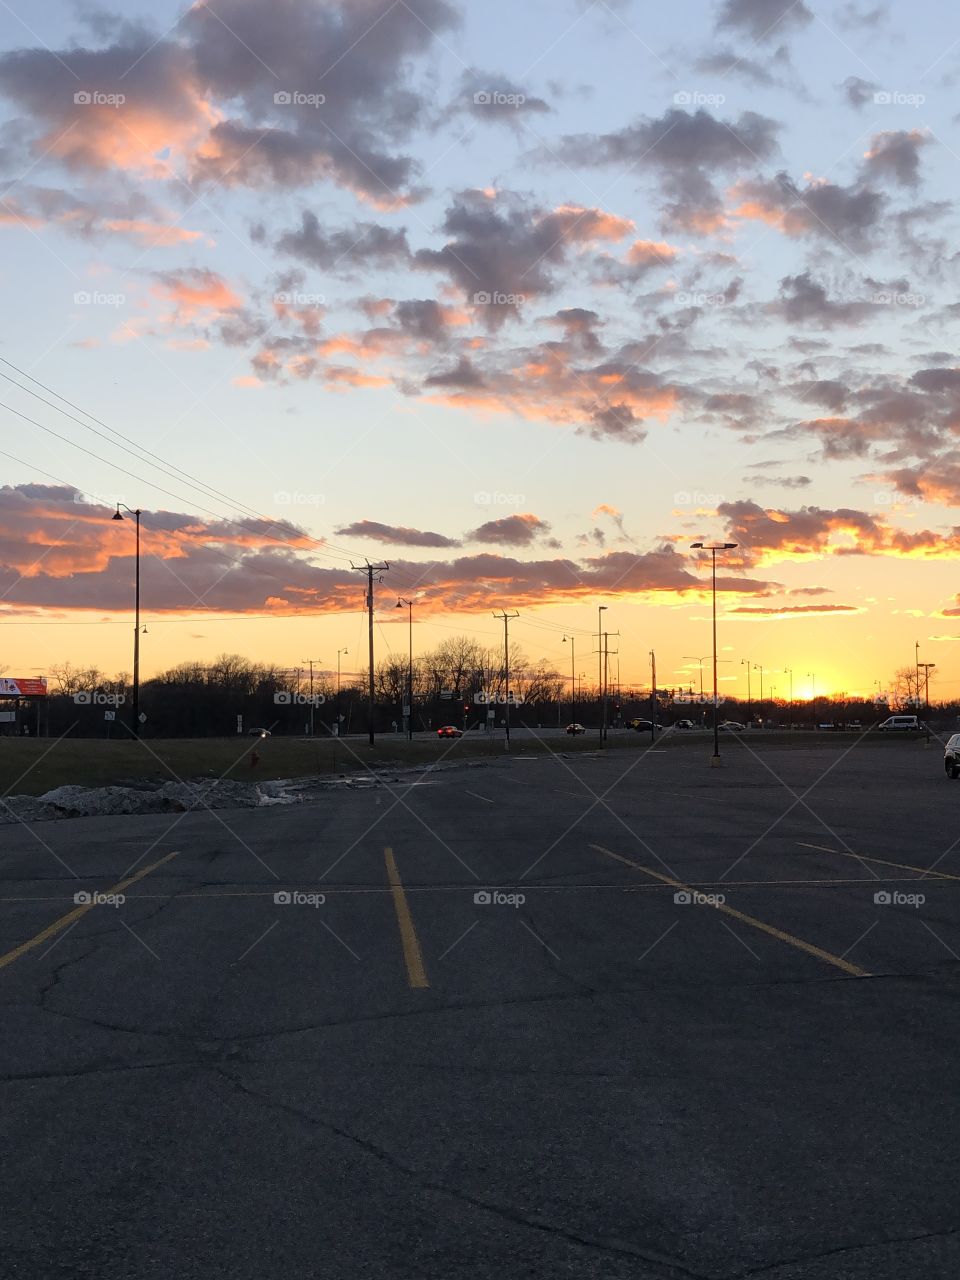 Parking lot sunsets? I think yes 